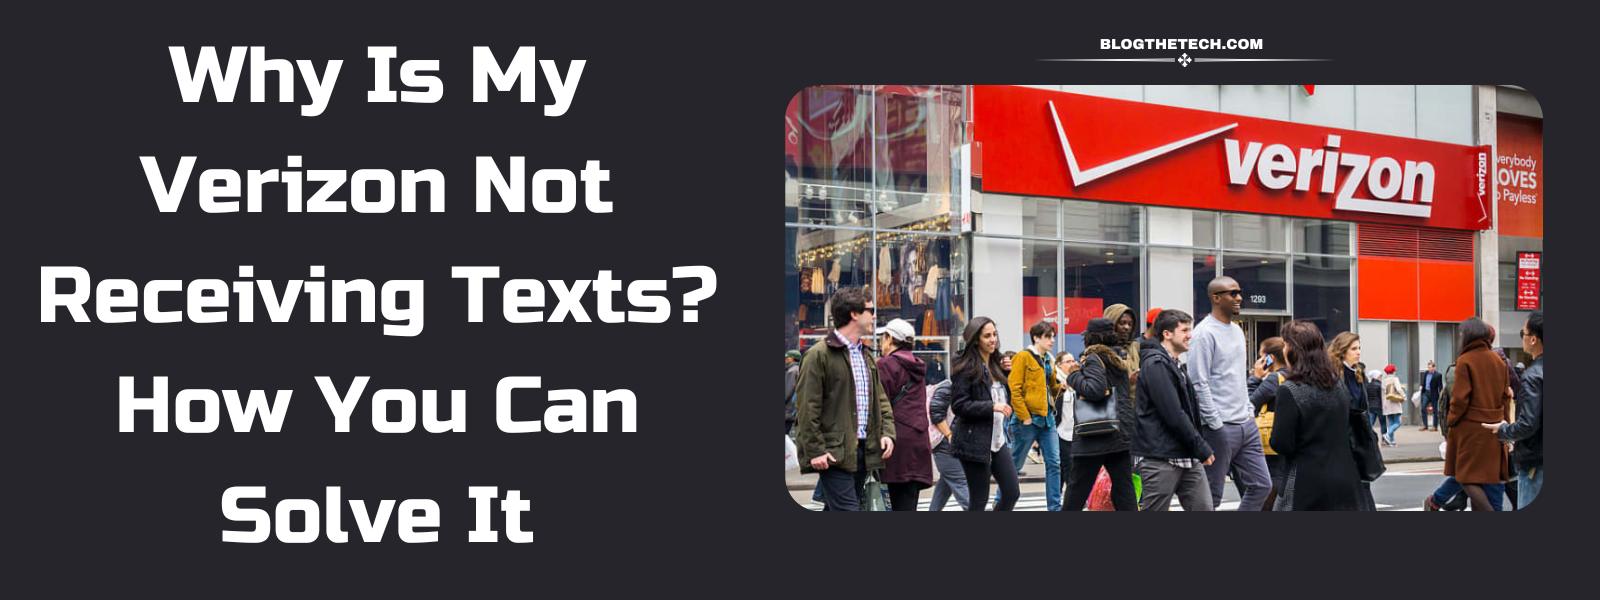 verizon-not-receiving-texts-how-you-can-solve-it-featured